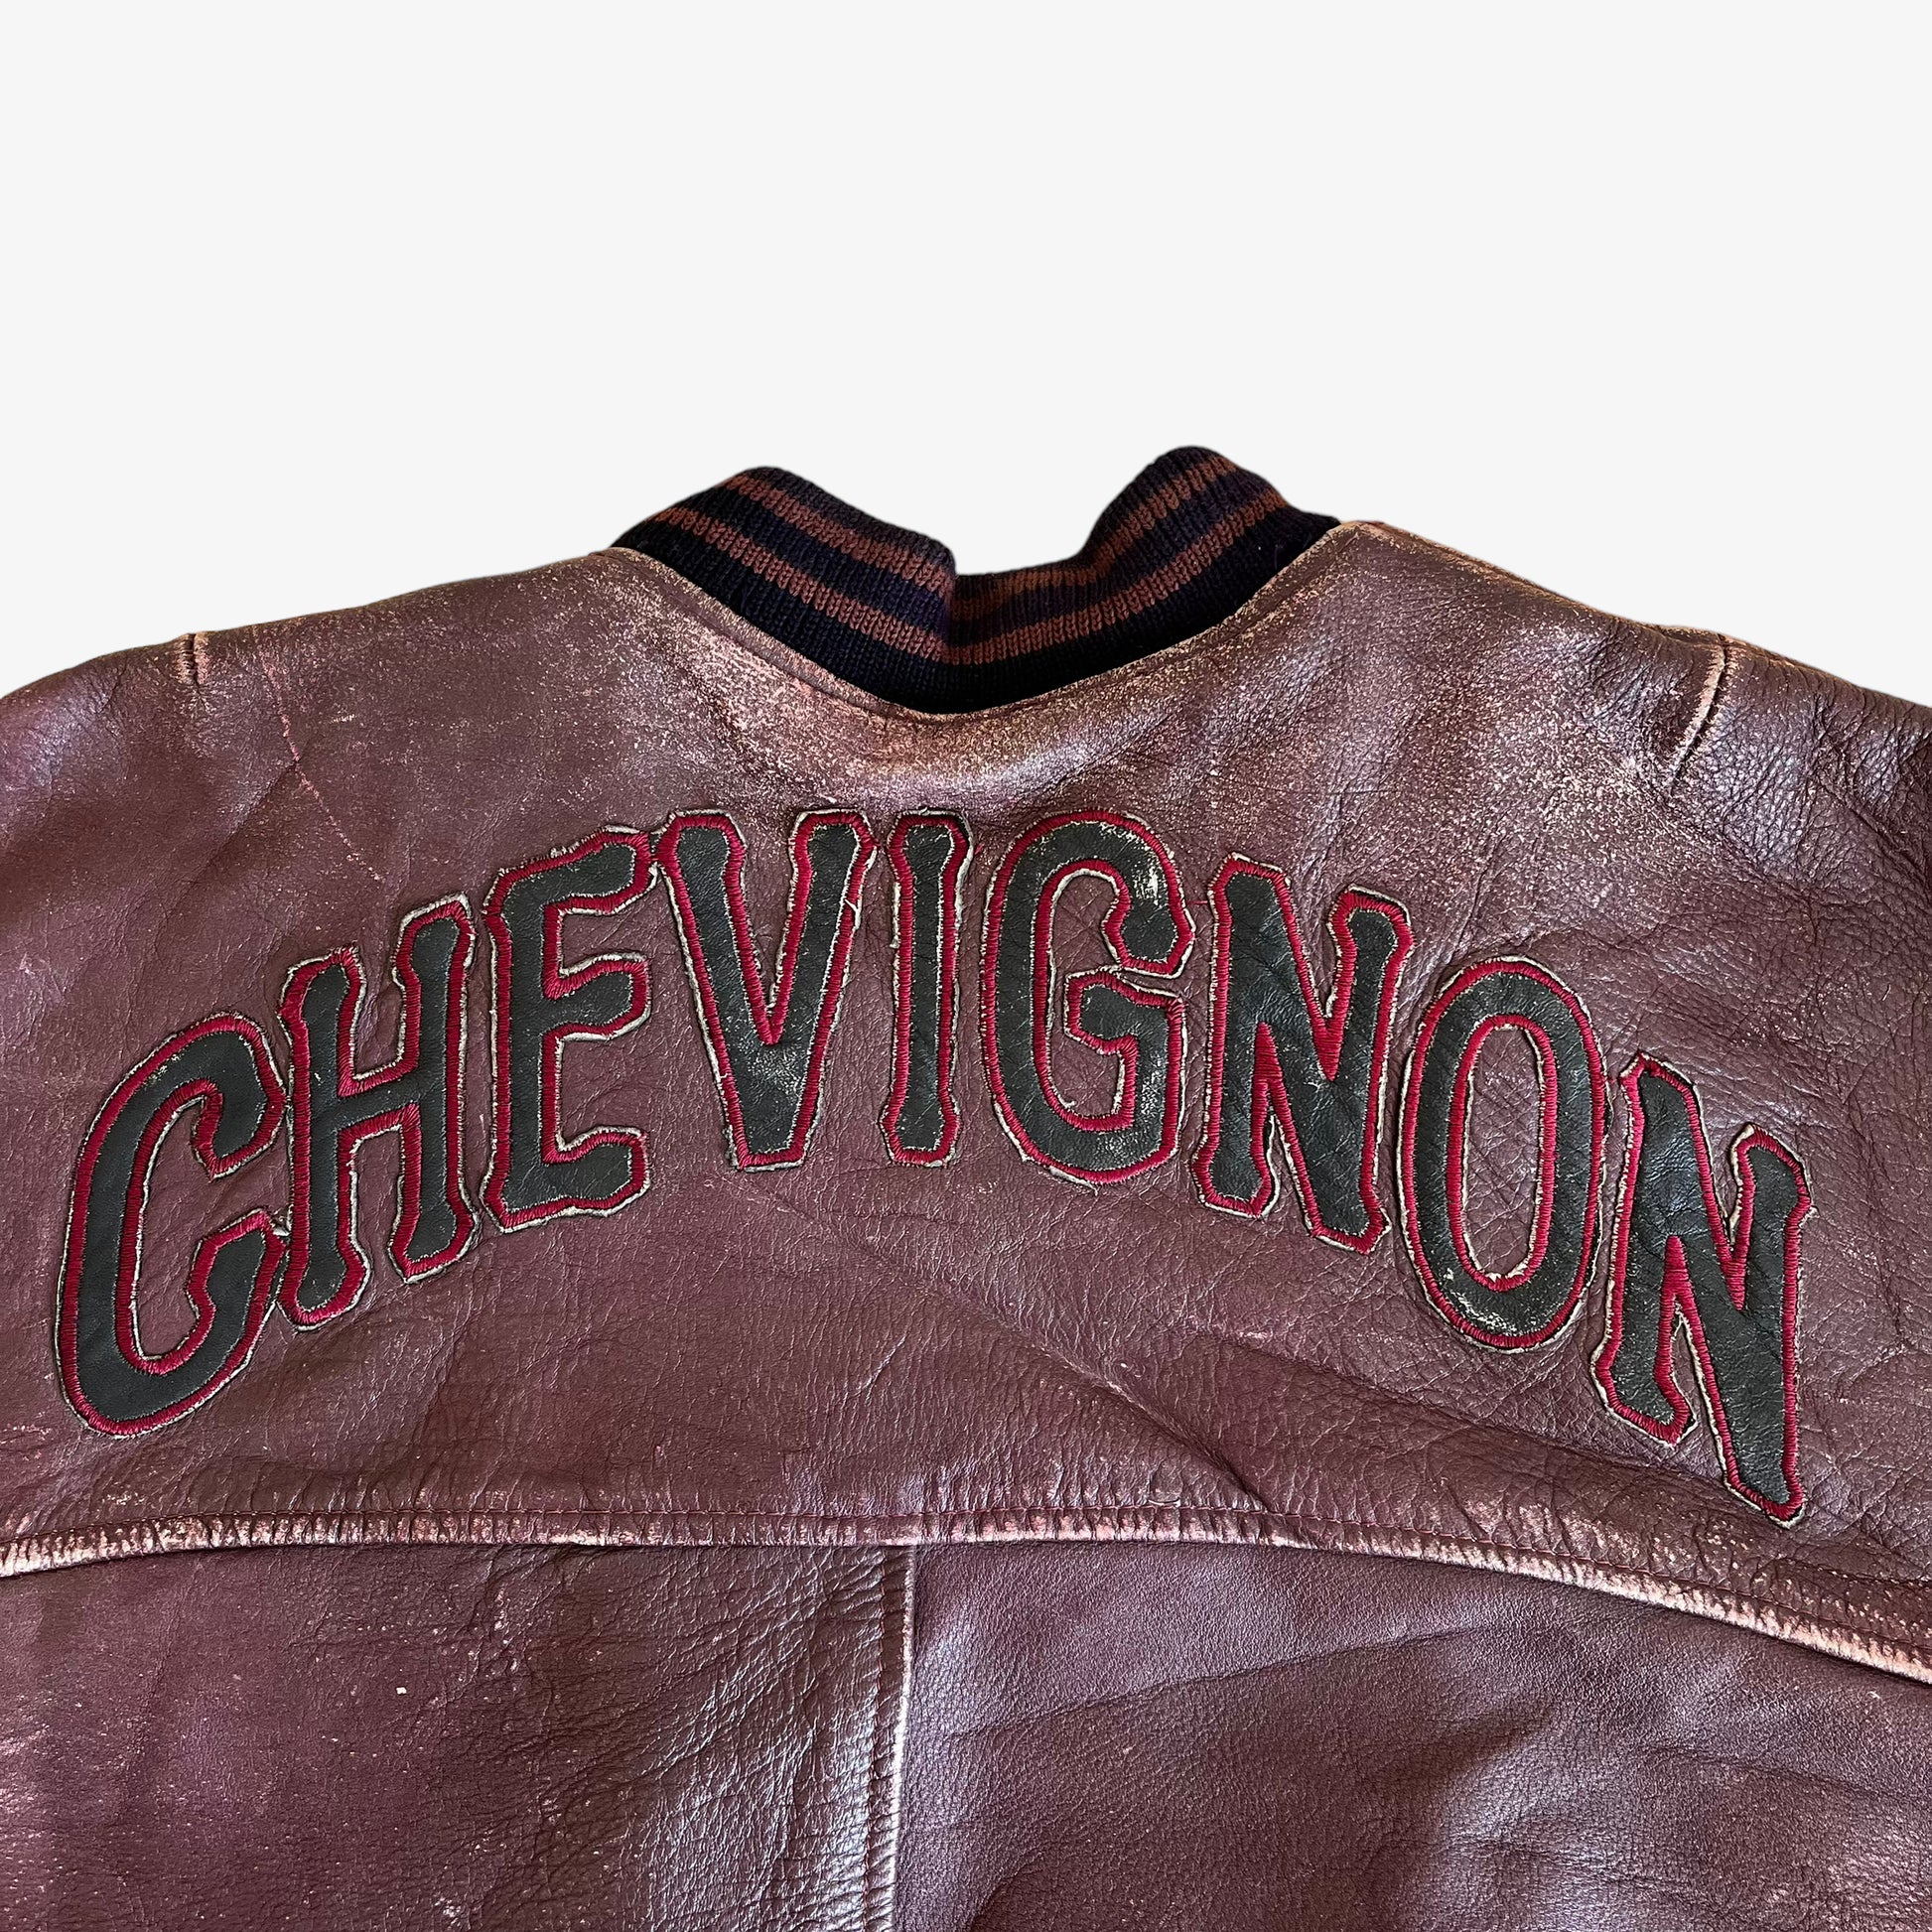 Vintage 90s Chevignon Burgundy Leather Jacket With Back Spell Out Logo - Casspios Dream